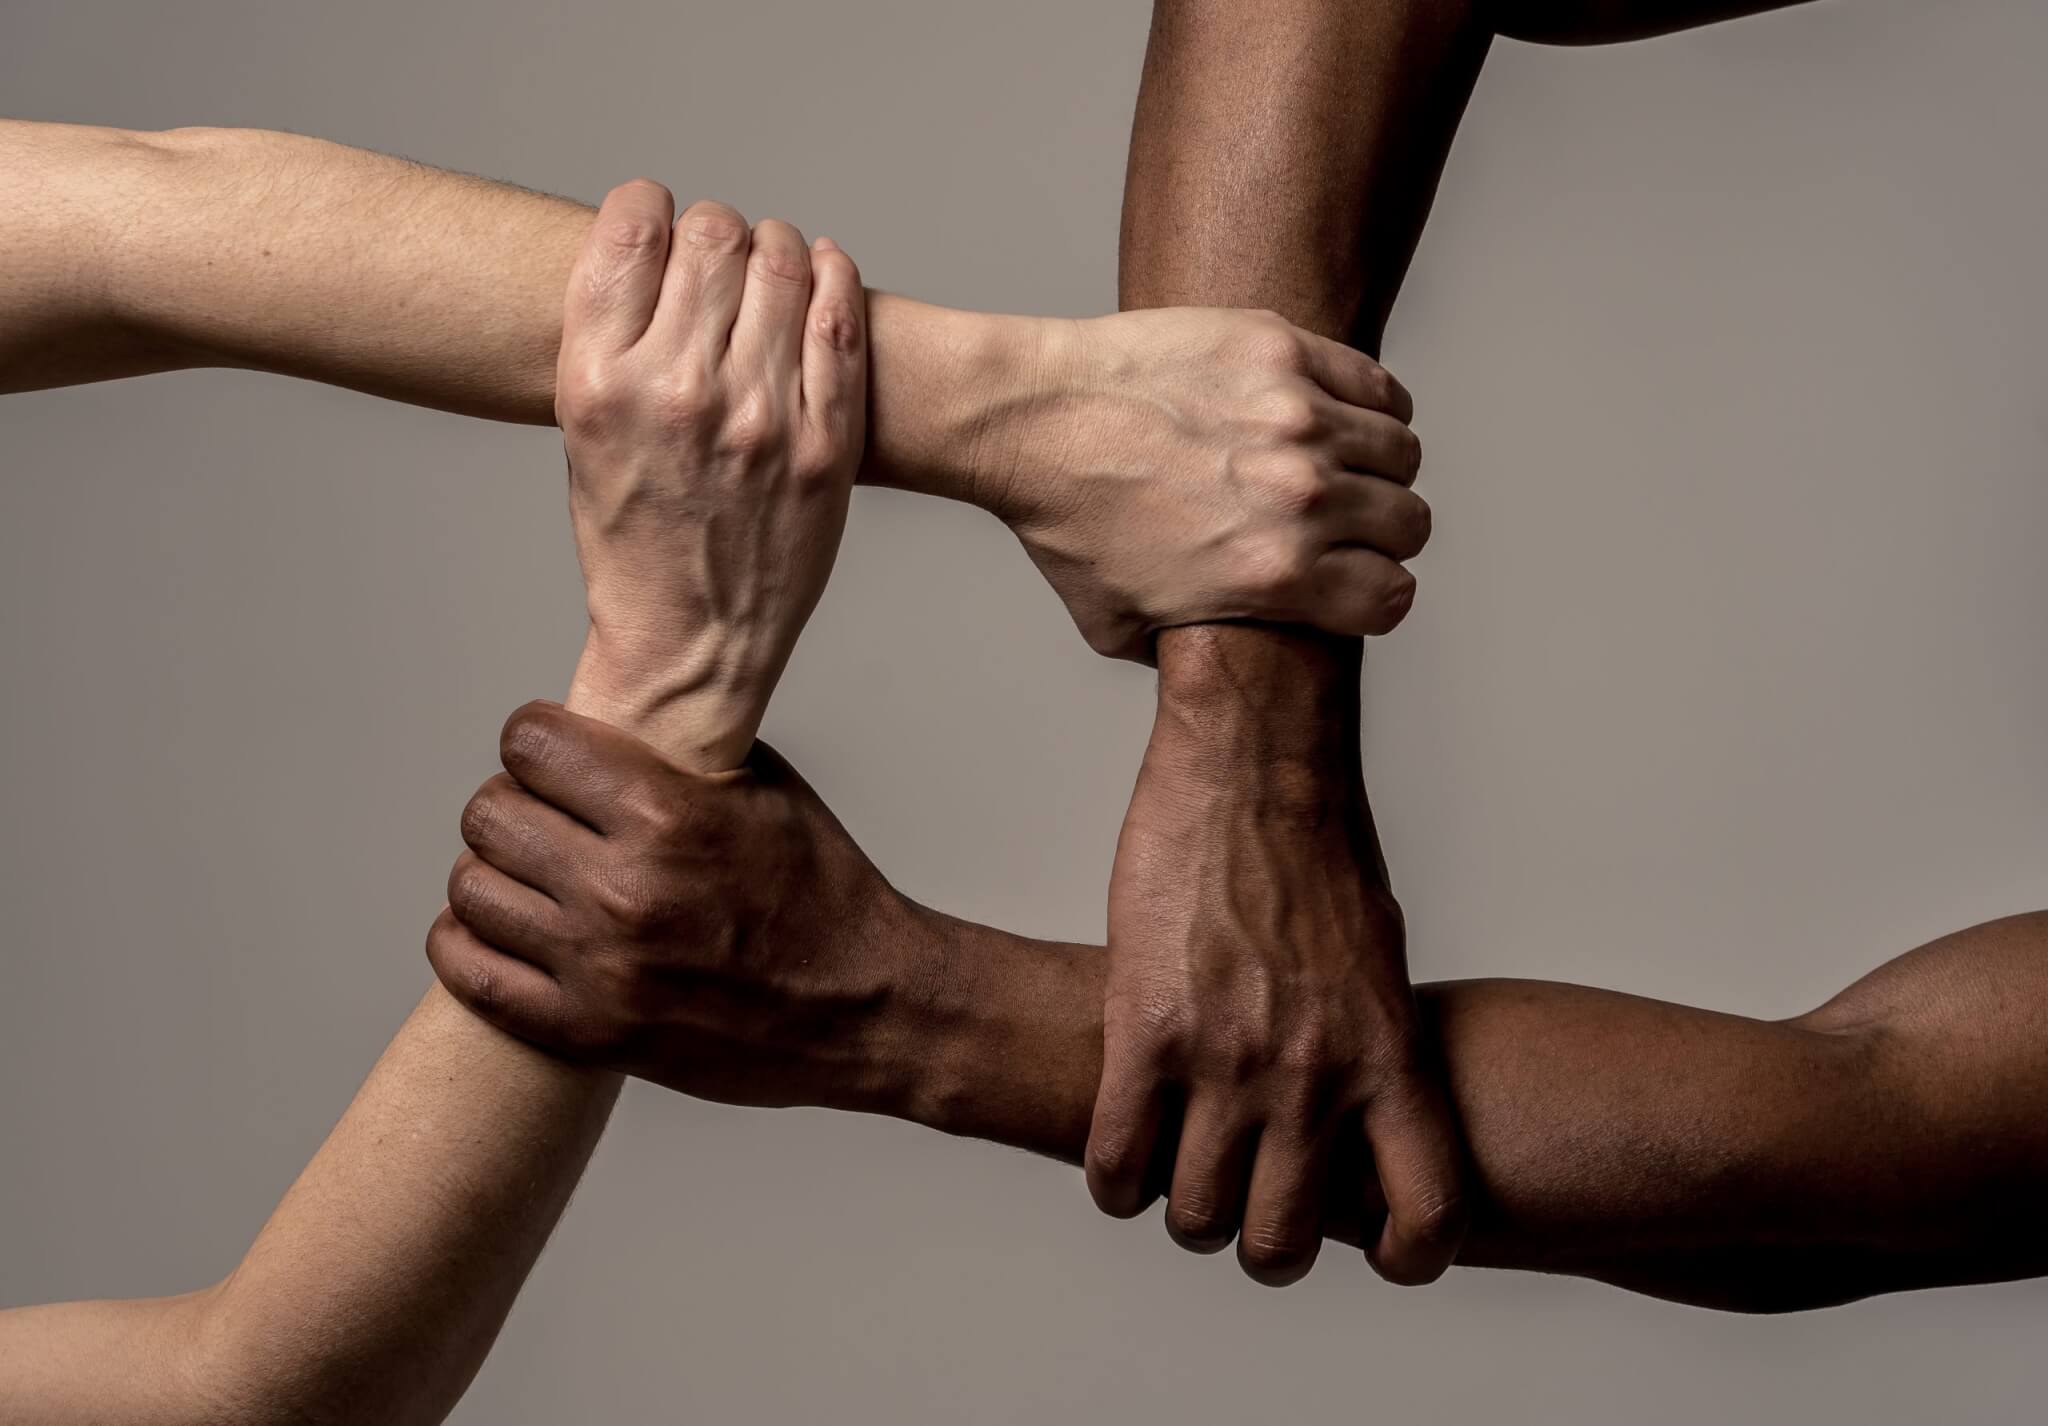 Colorism Project Continues with Aim of Understanding Racism’s Roots